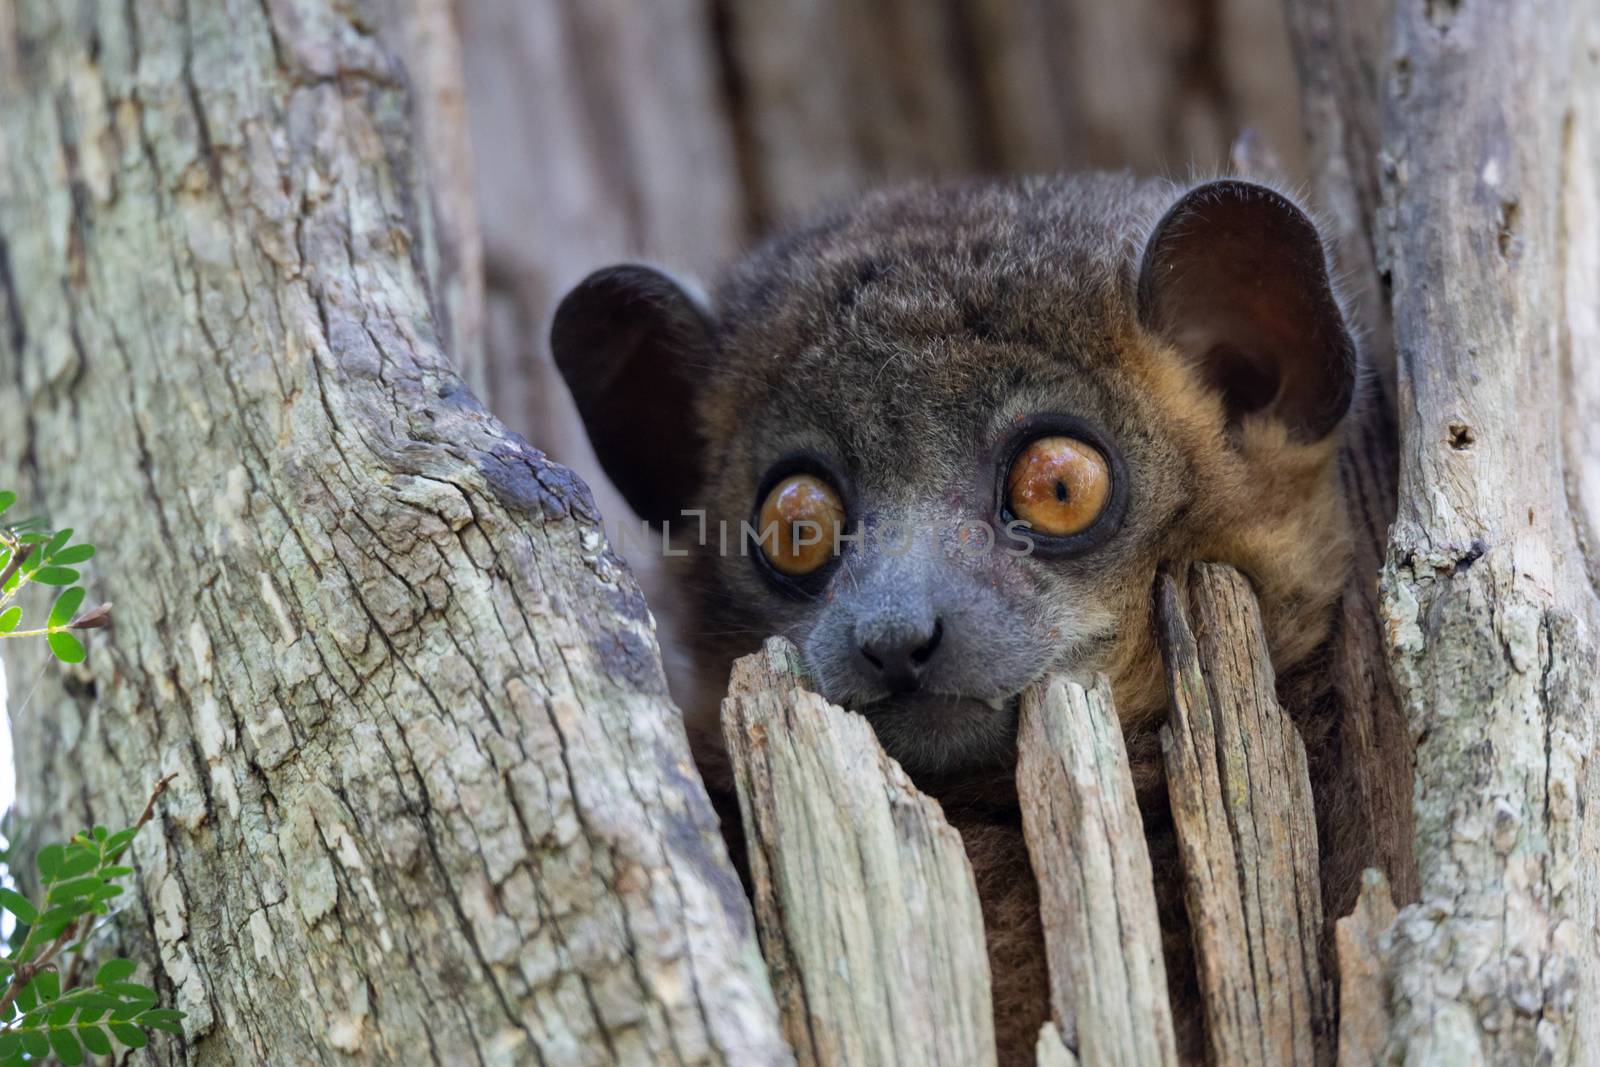 A weasel lemur in a tree hollow looks out curiously.